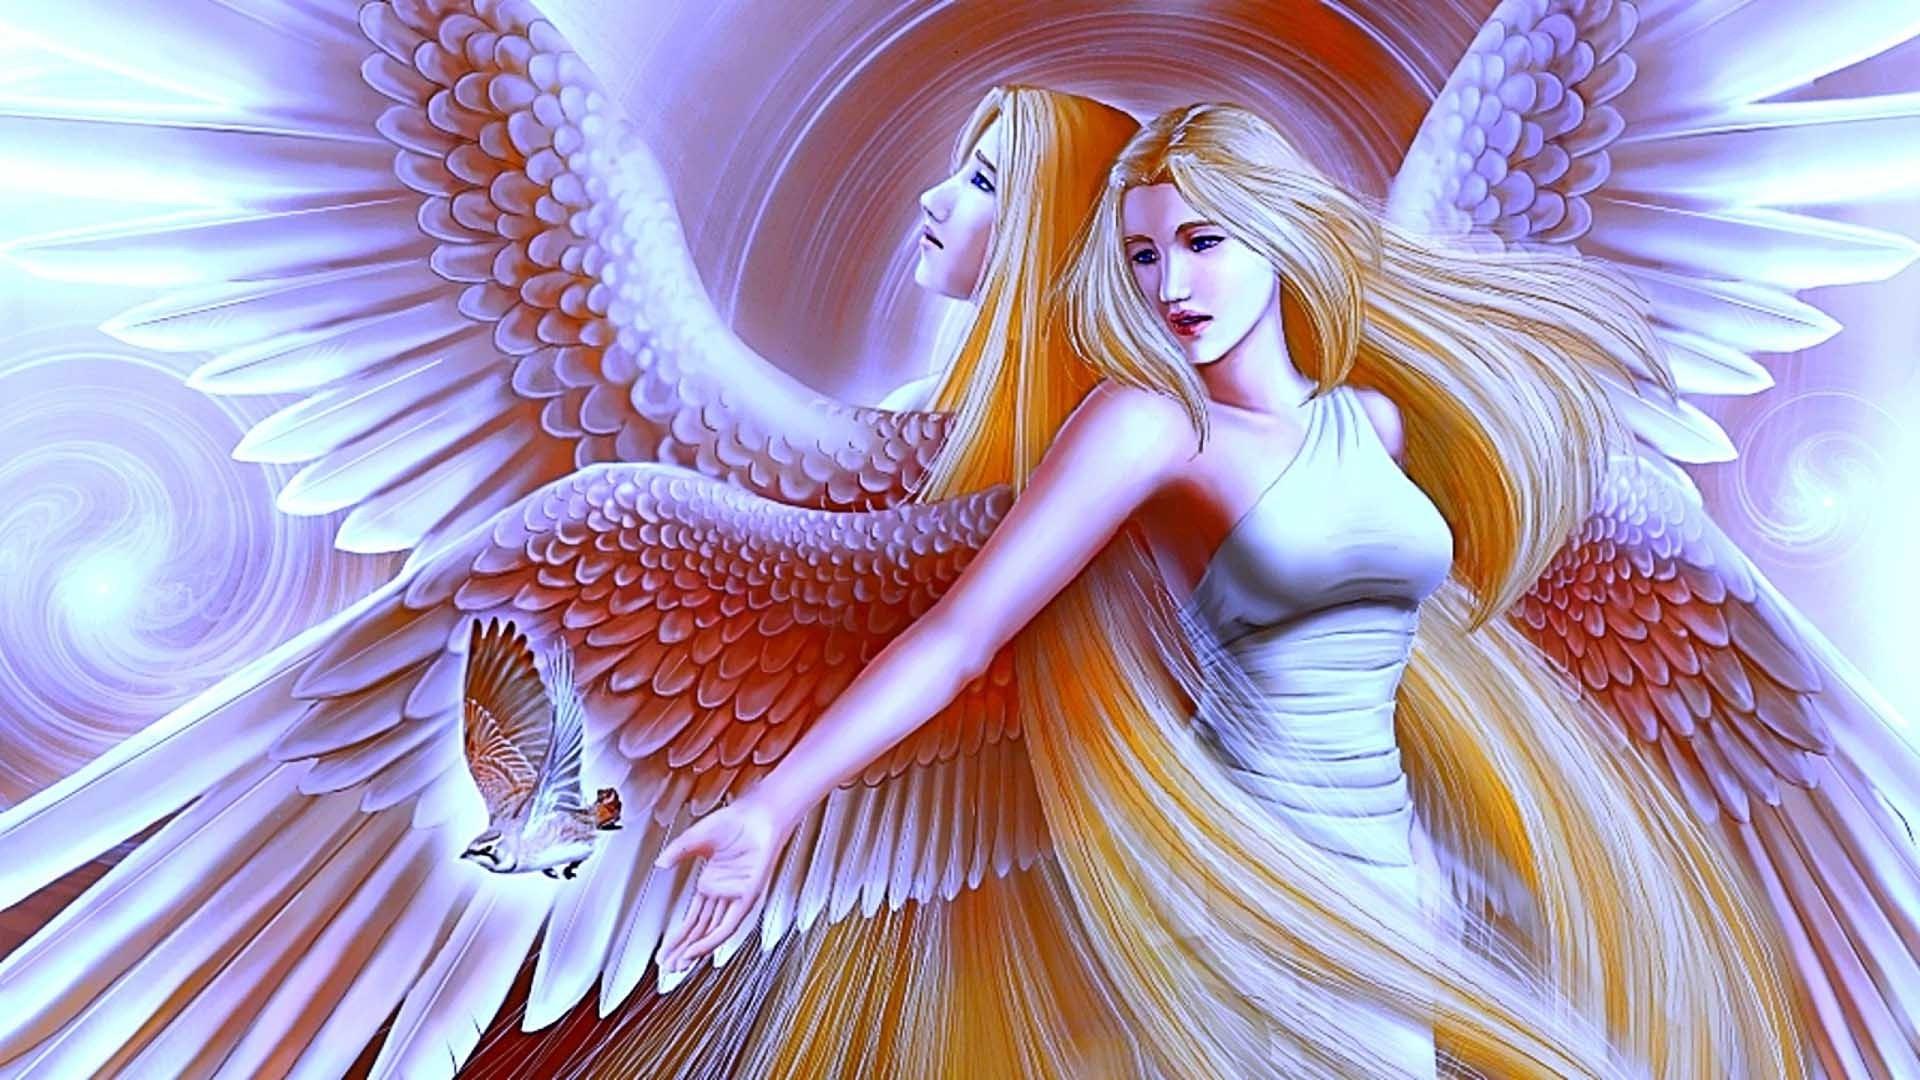 10 Top Angel And Demons Wallpaper FULL HD 1080p For PC Desktop  Dark angel  wallpaper Angel wallpaper Angels and demons